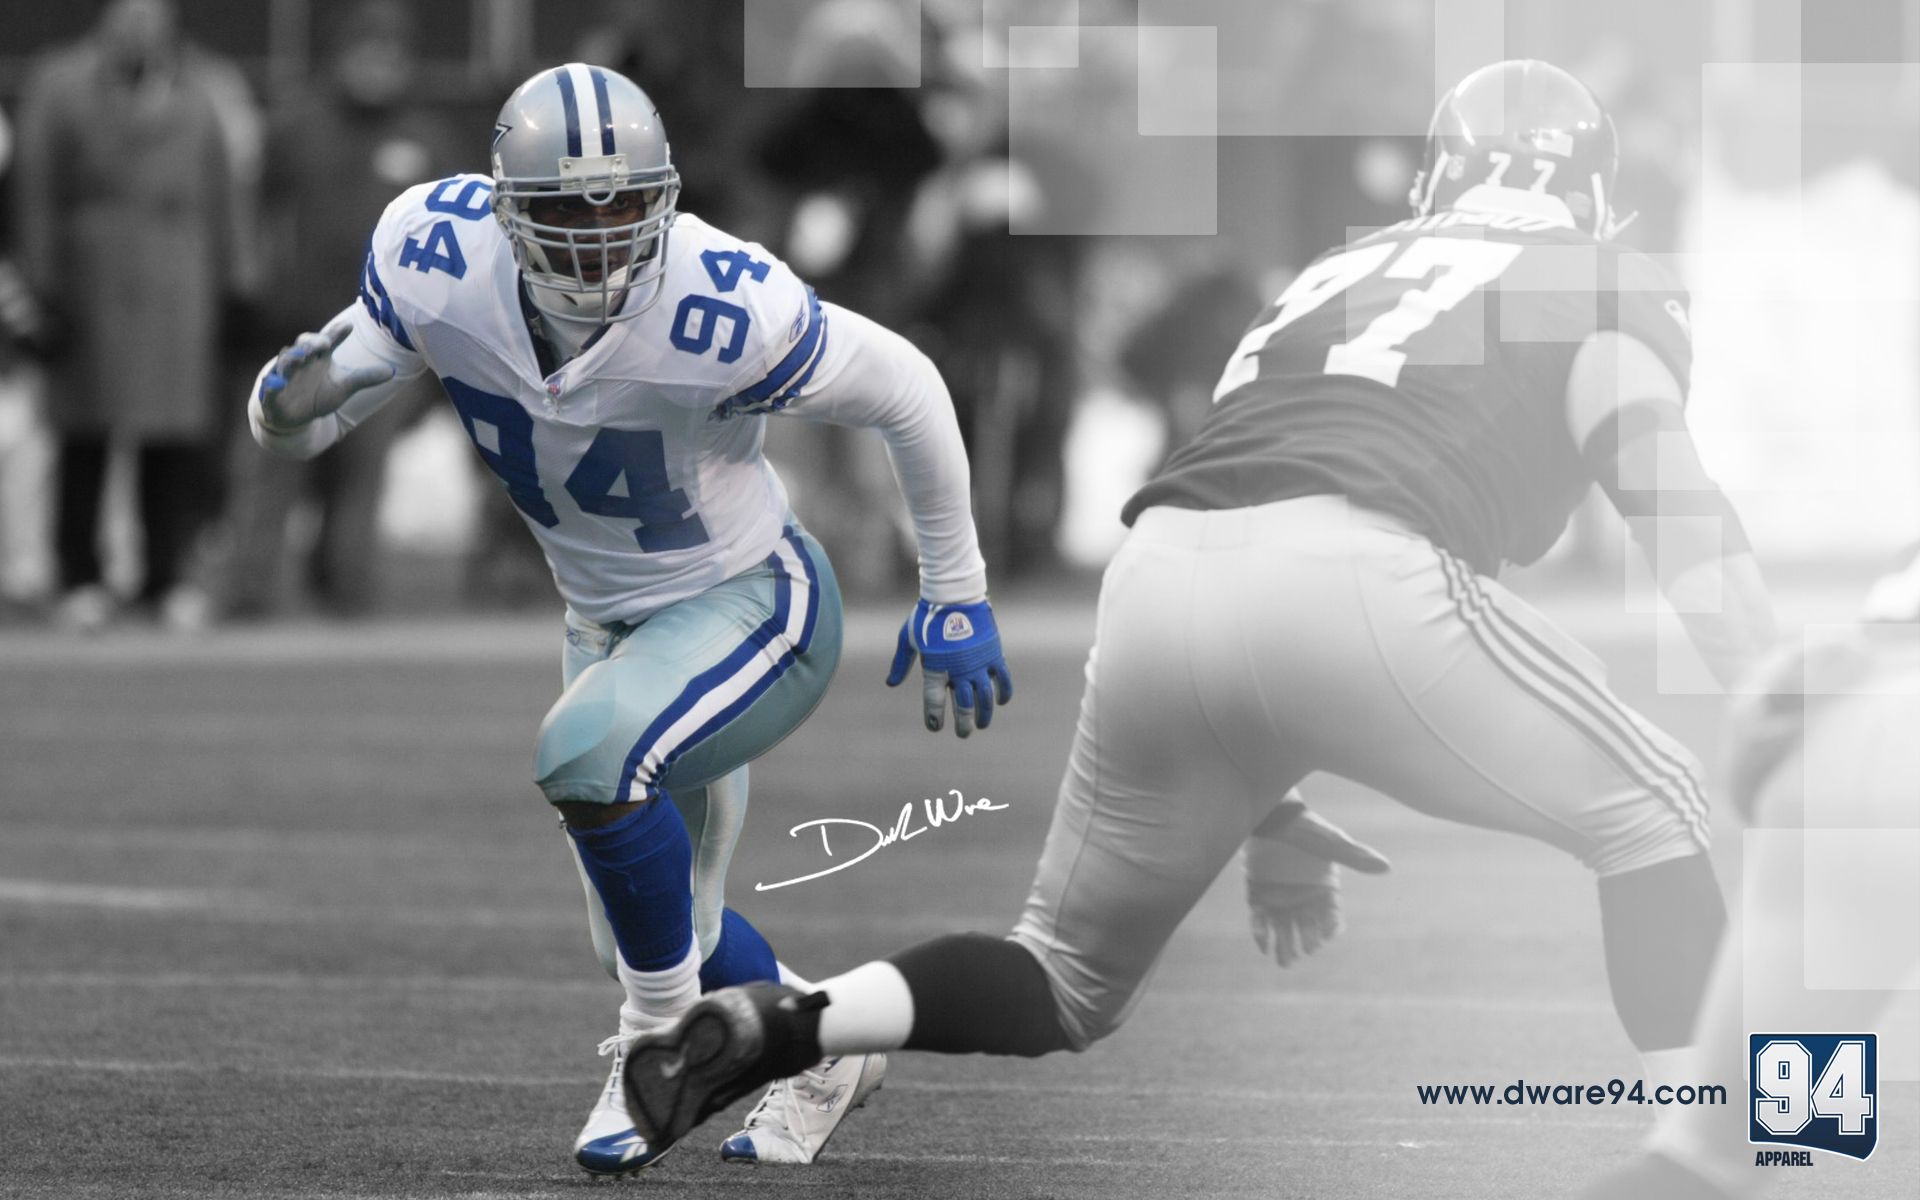 Demarcus Ware Wallpapers High Quality Download Free